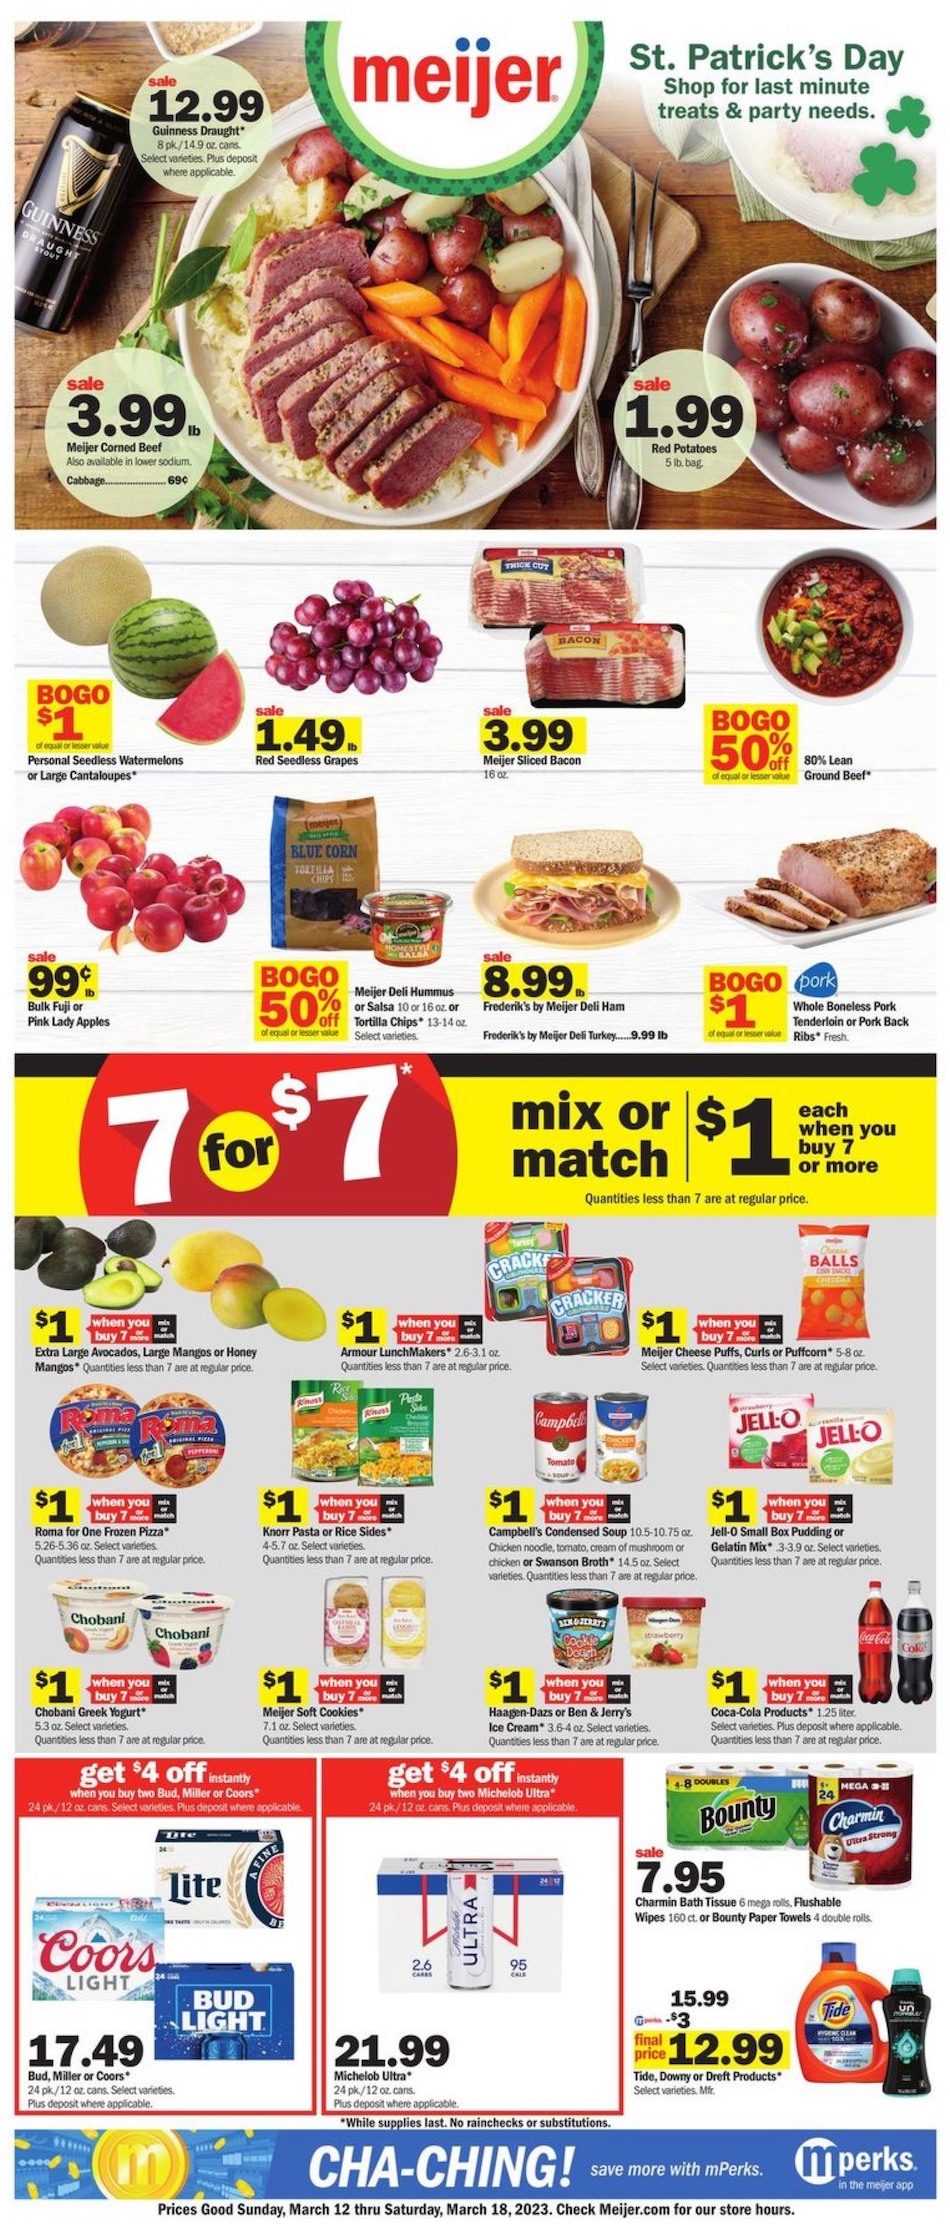 Meijer Weekly Ad St Patrick’s Day 12th – 18th March 2023 Page 1